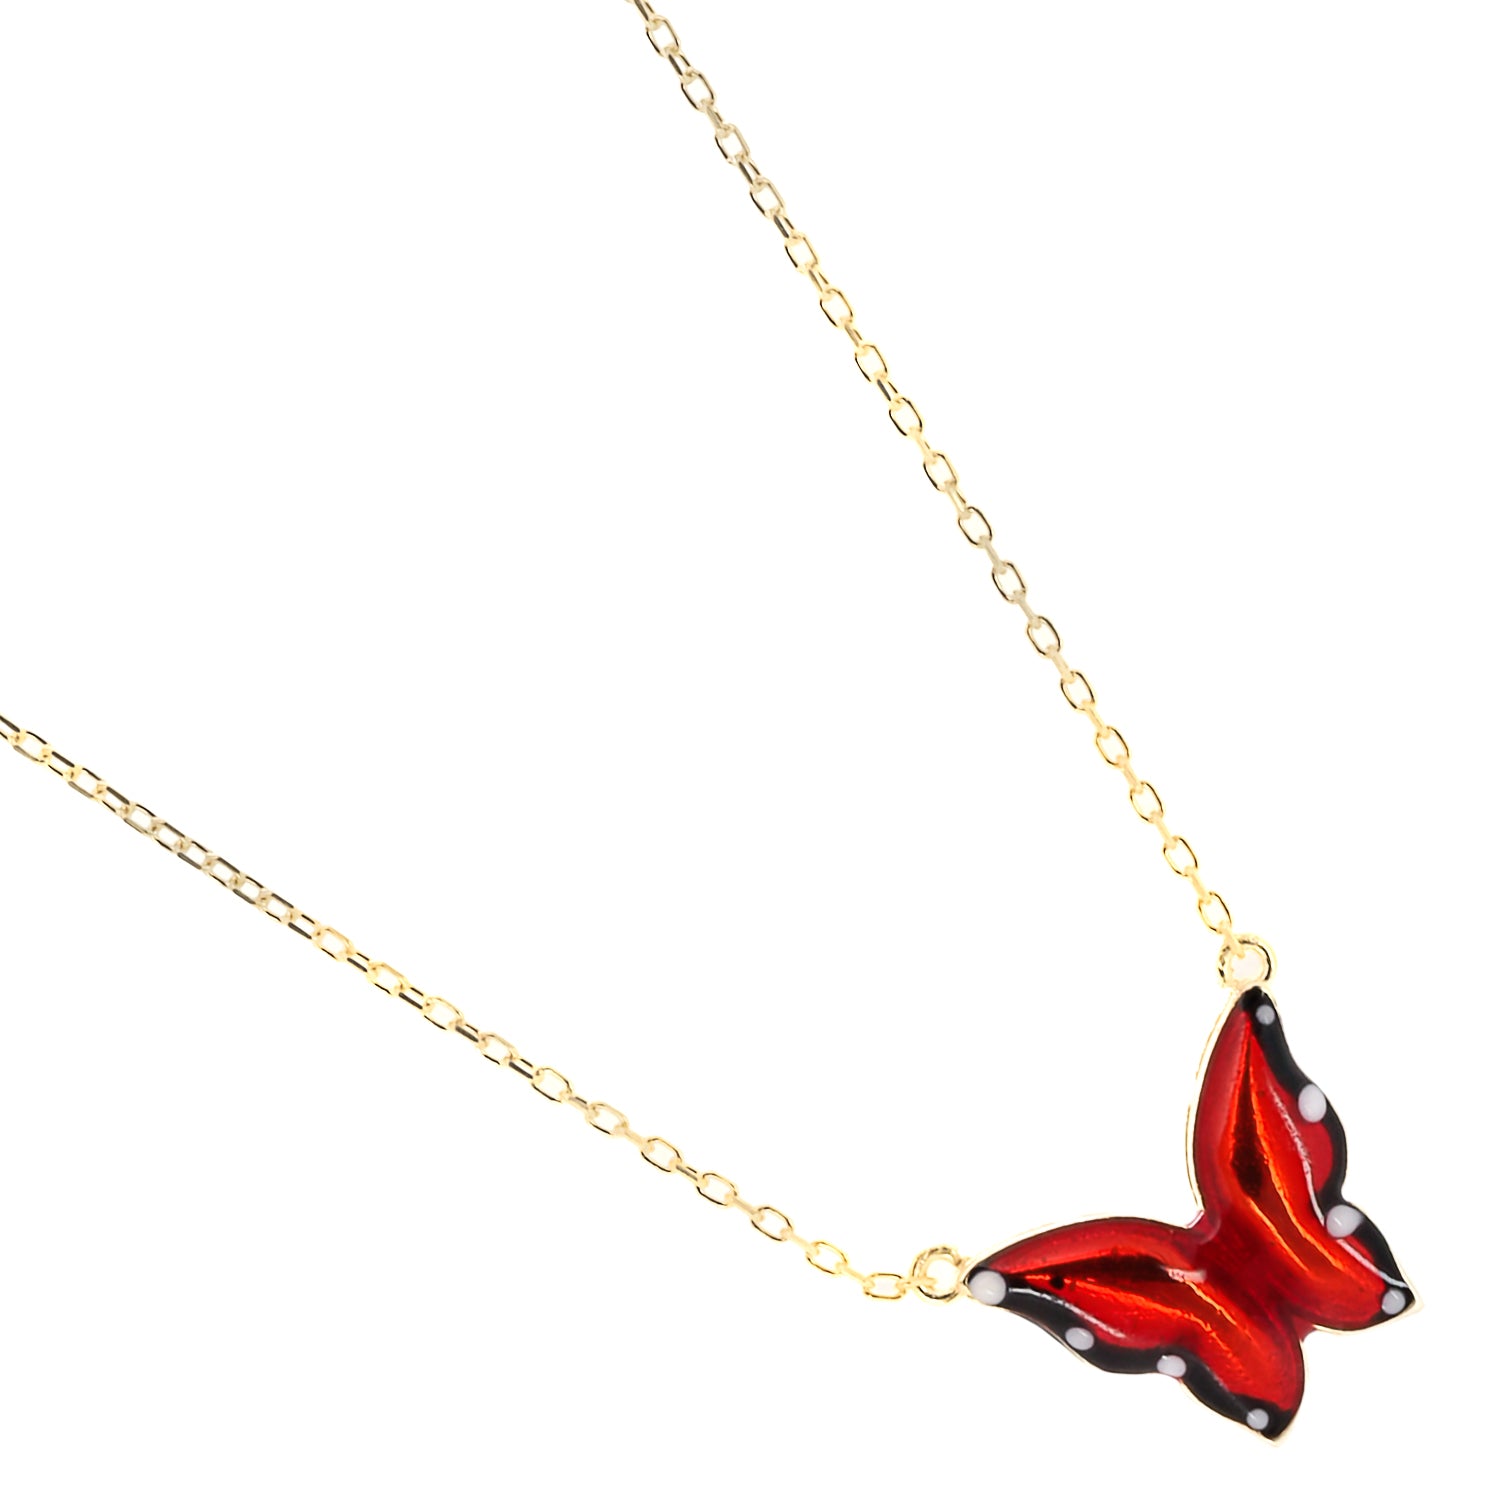 The captivating butterfly pendant of the Gold Joy Red Enamel Butterfly Necklace, symbolizing transformation and rebirth.